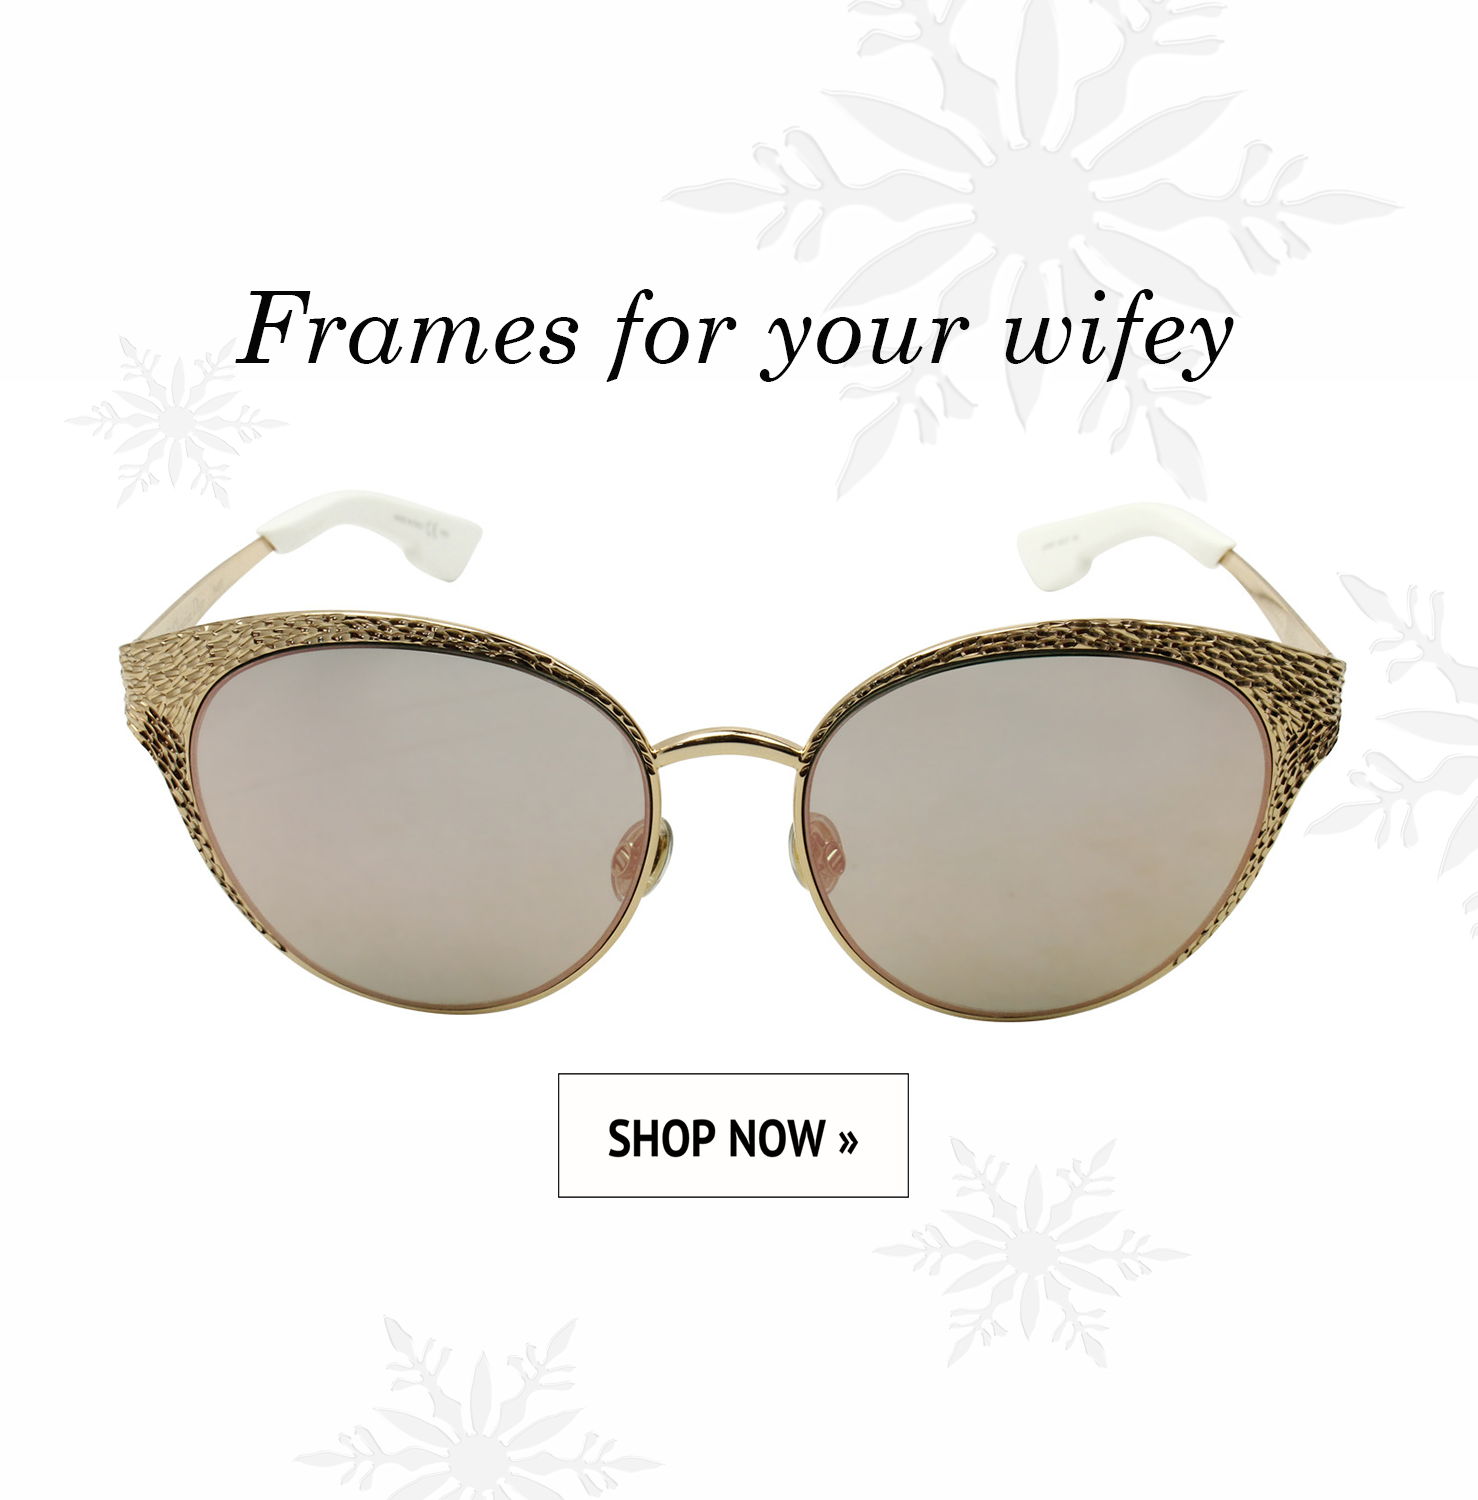 Frames for your wifey